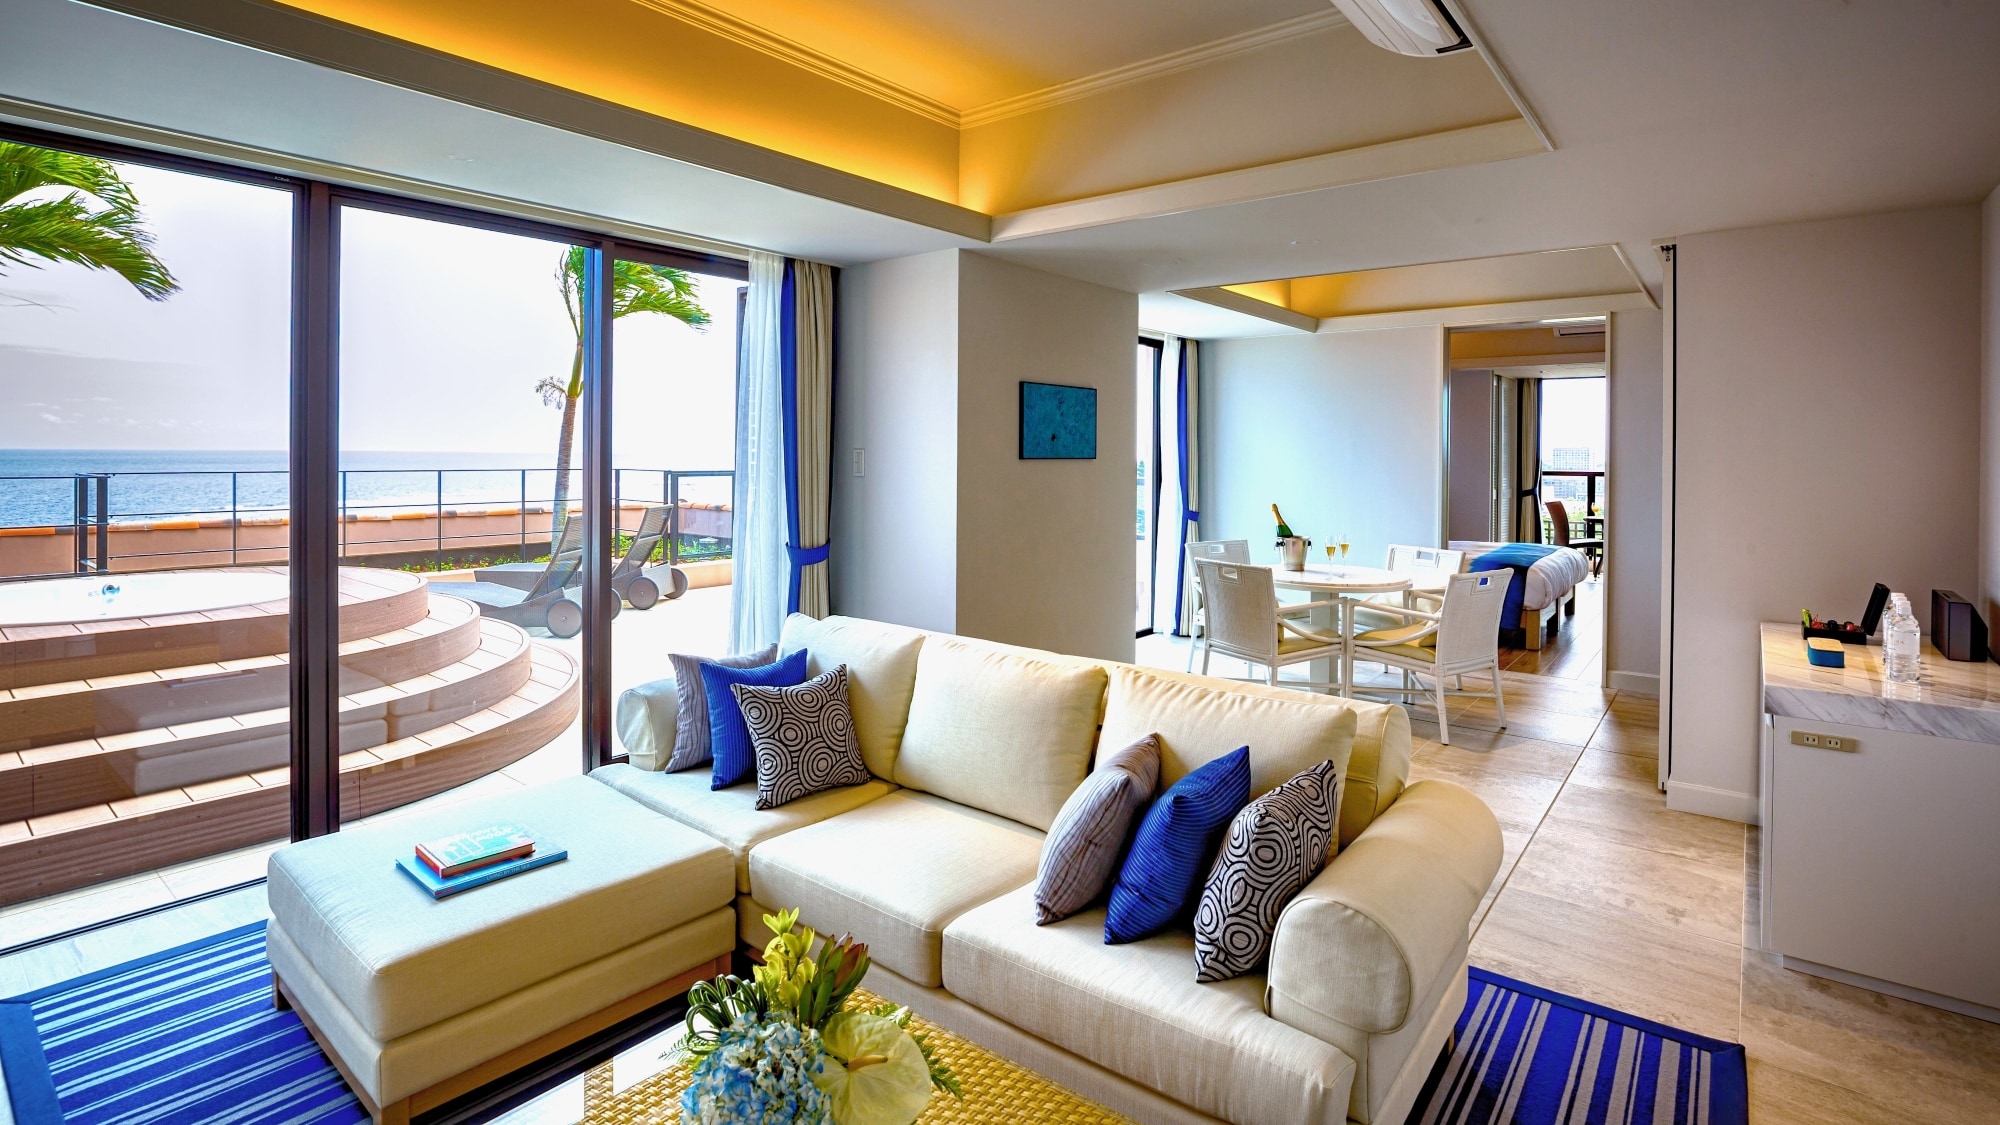 [Bayside/Deluxe Suite 2 Bedroom] A 2-bedroom suite with a jacuzzi.